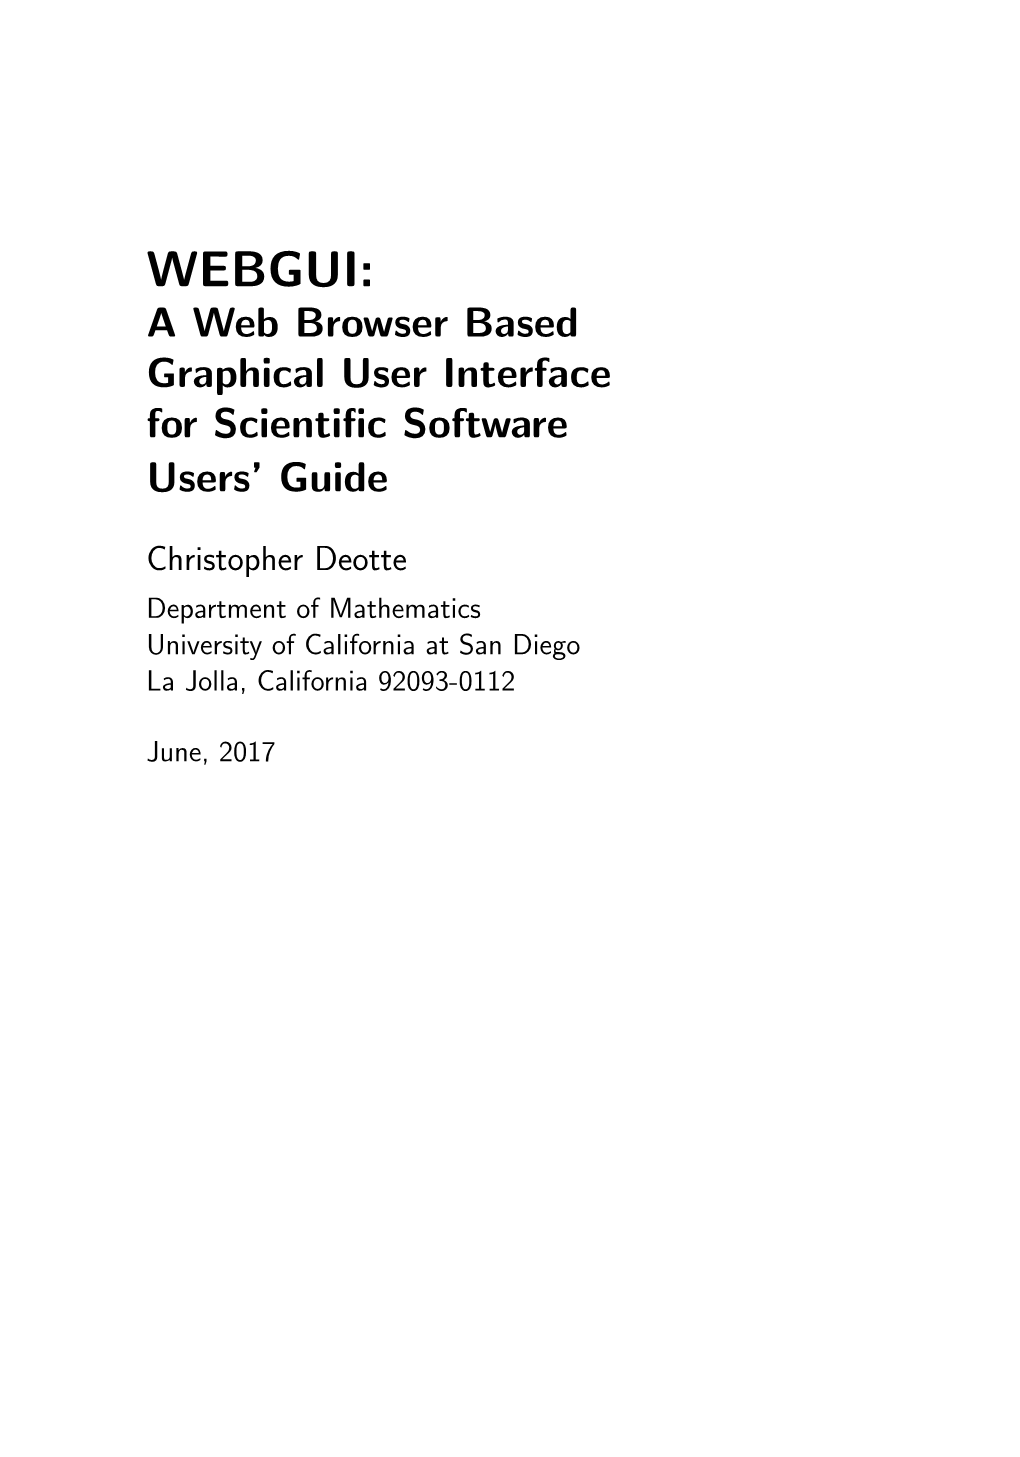 WEBGUI: a Web Browser Based Graphical User Interface for Scientiﬁc Software Users’ Guide